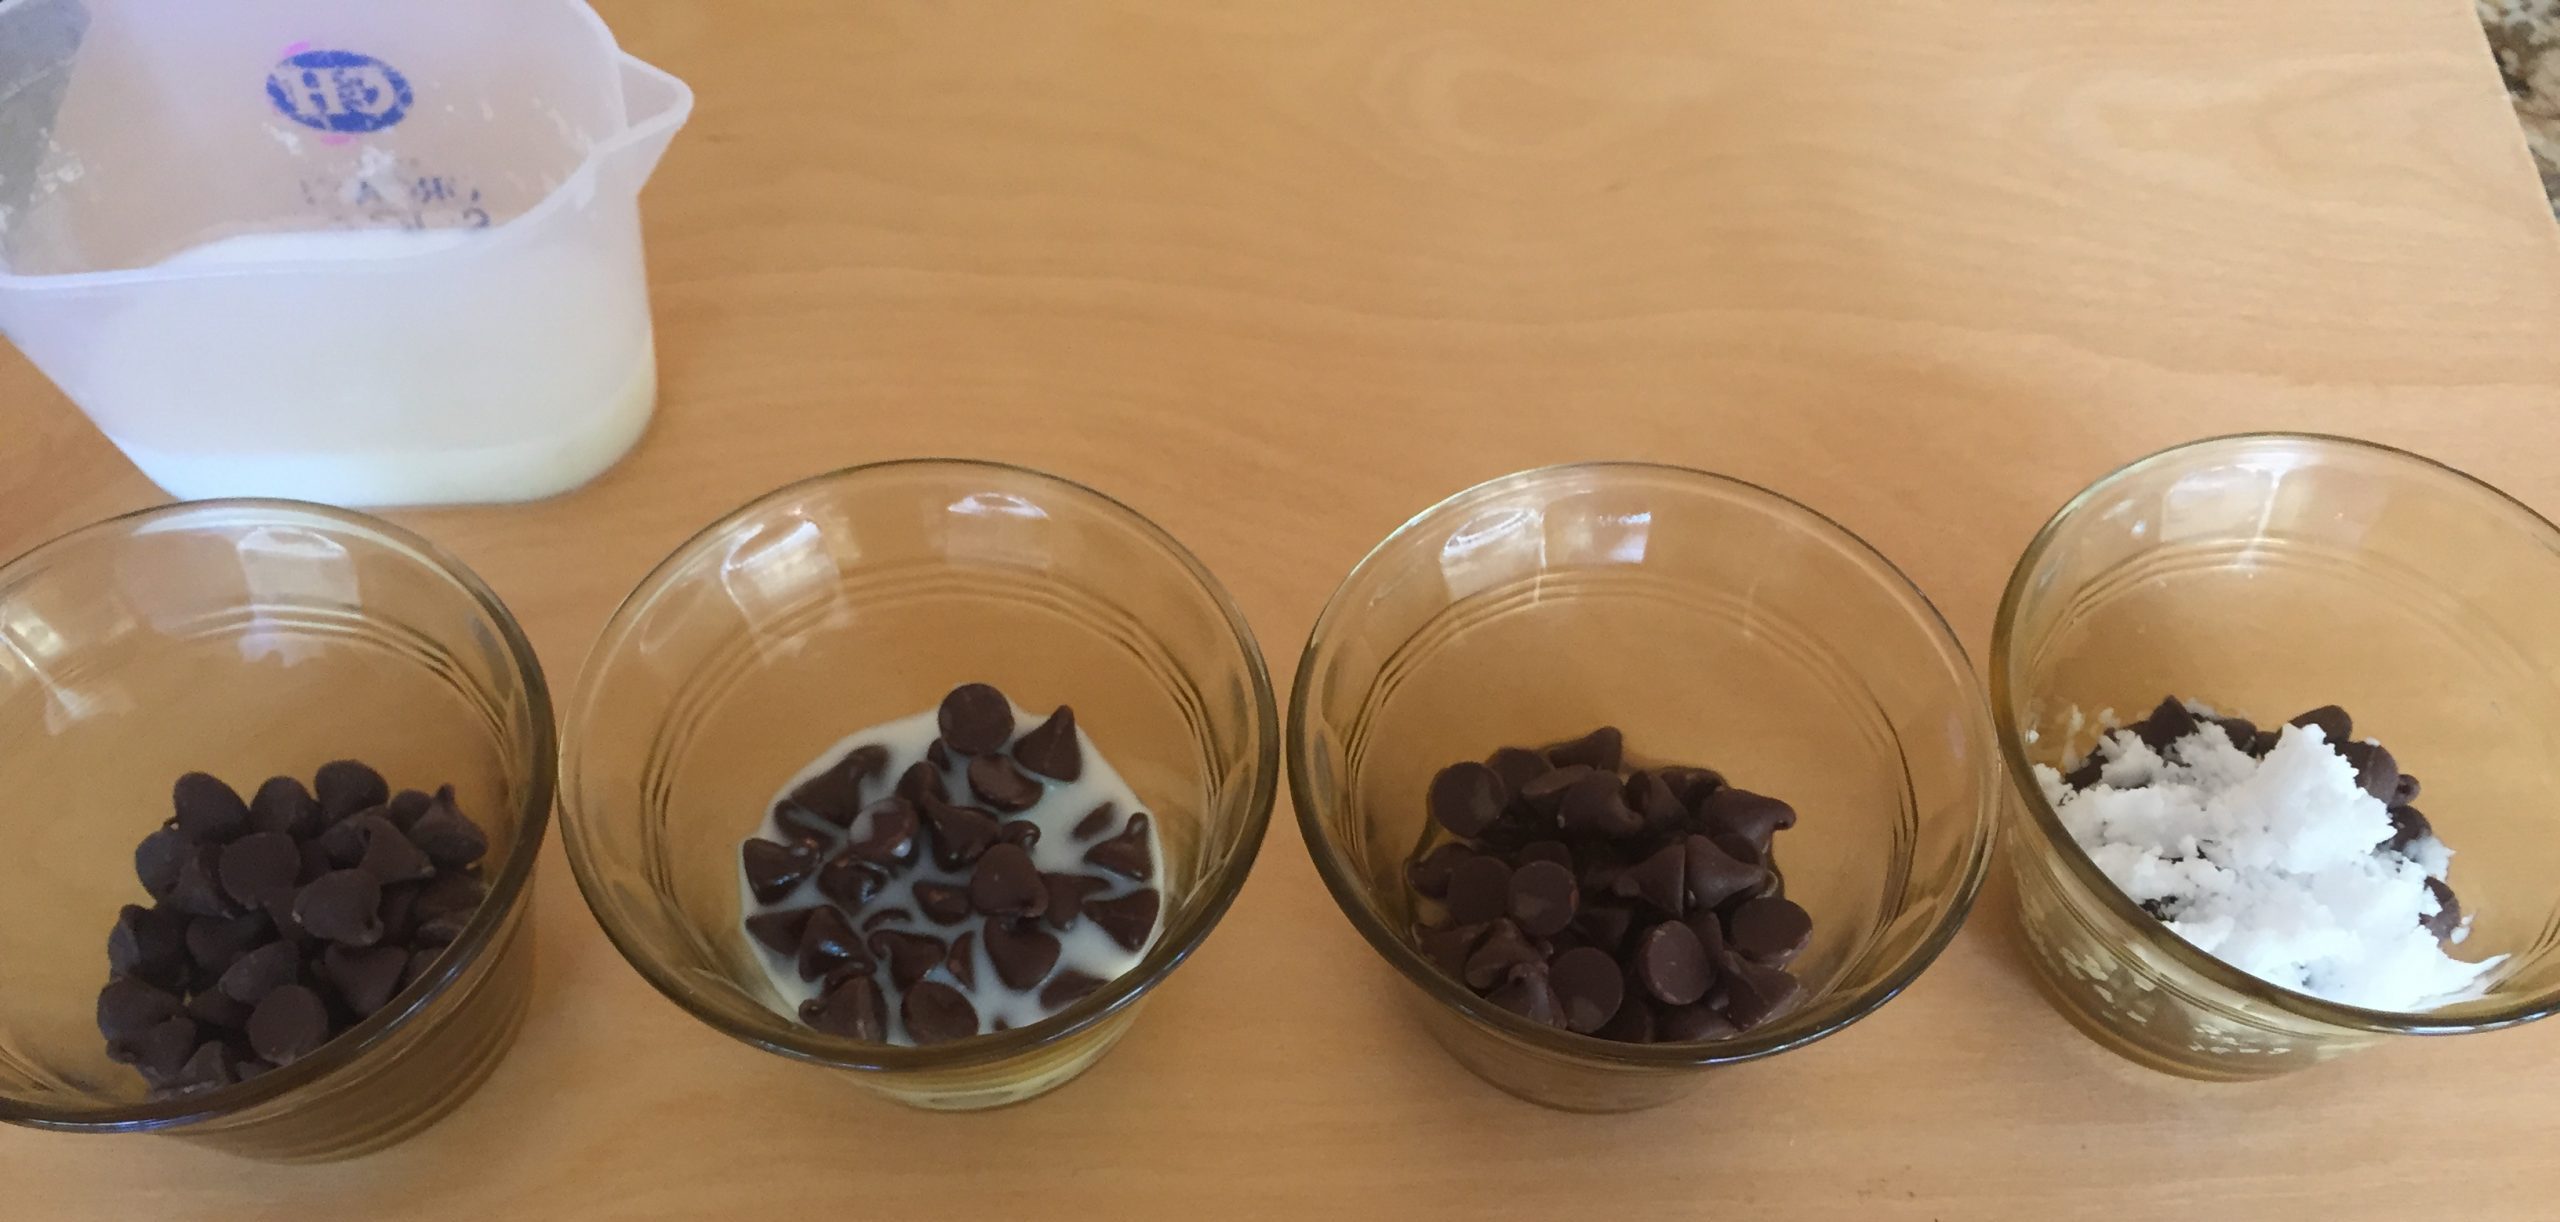 Microwaving chocolate experiment with milk, water and coconut oil